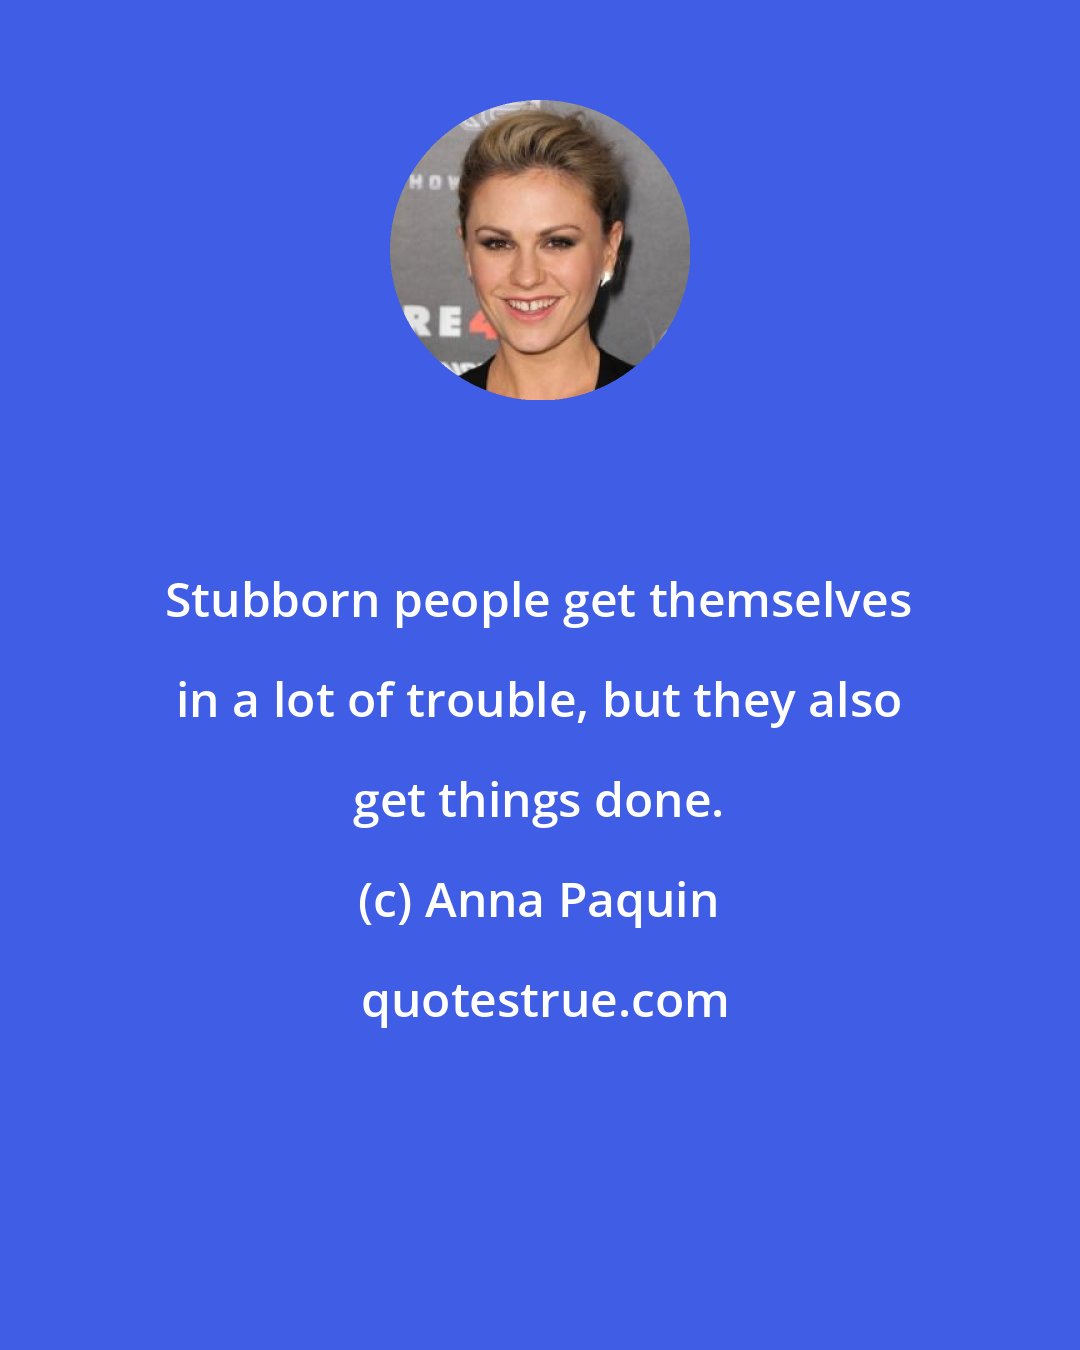 Anna Paquin: Stubborn people get themselves in a lot of trouble, but they also get things done.